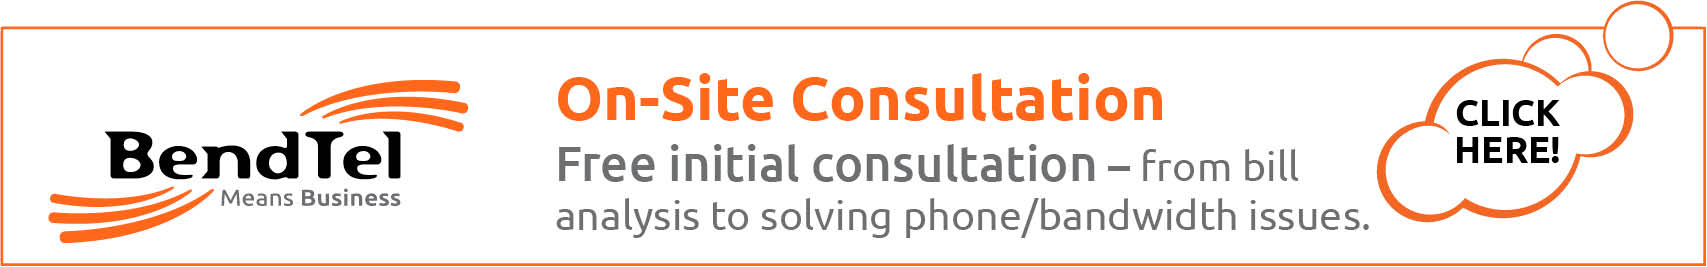 Contact us for a free on-site consultation